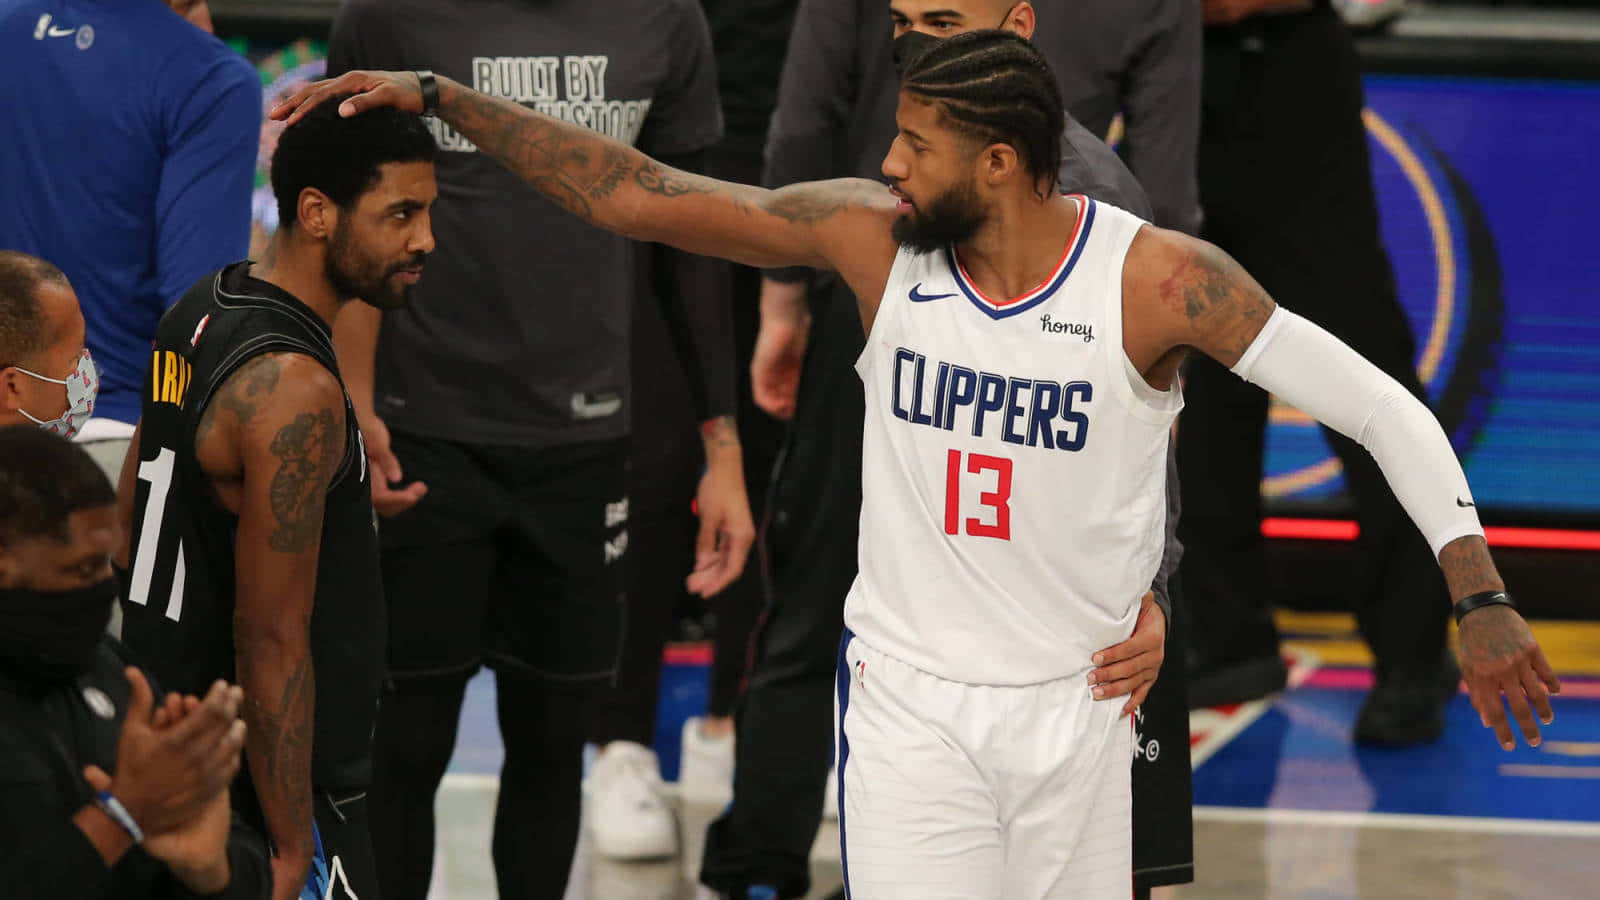 Paulgeorge Clippers Con Kyrie Irving Sfondo